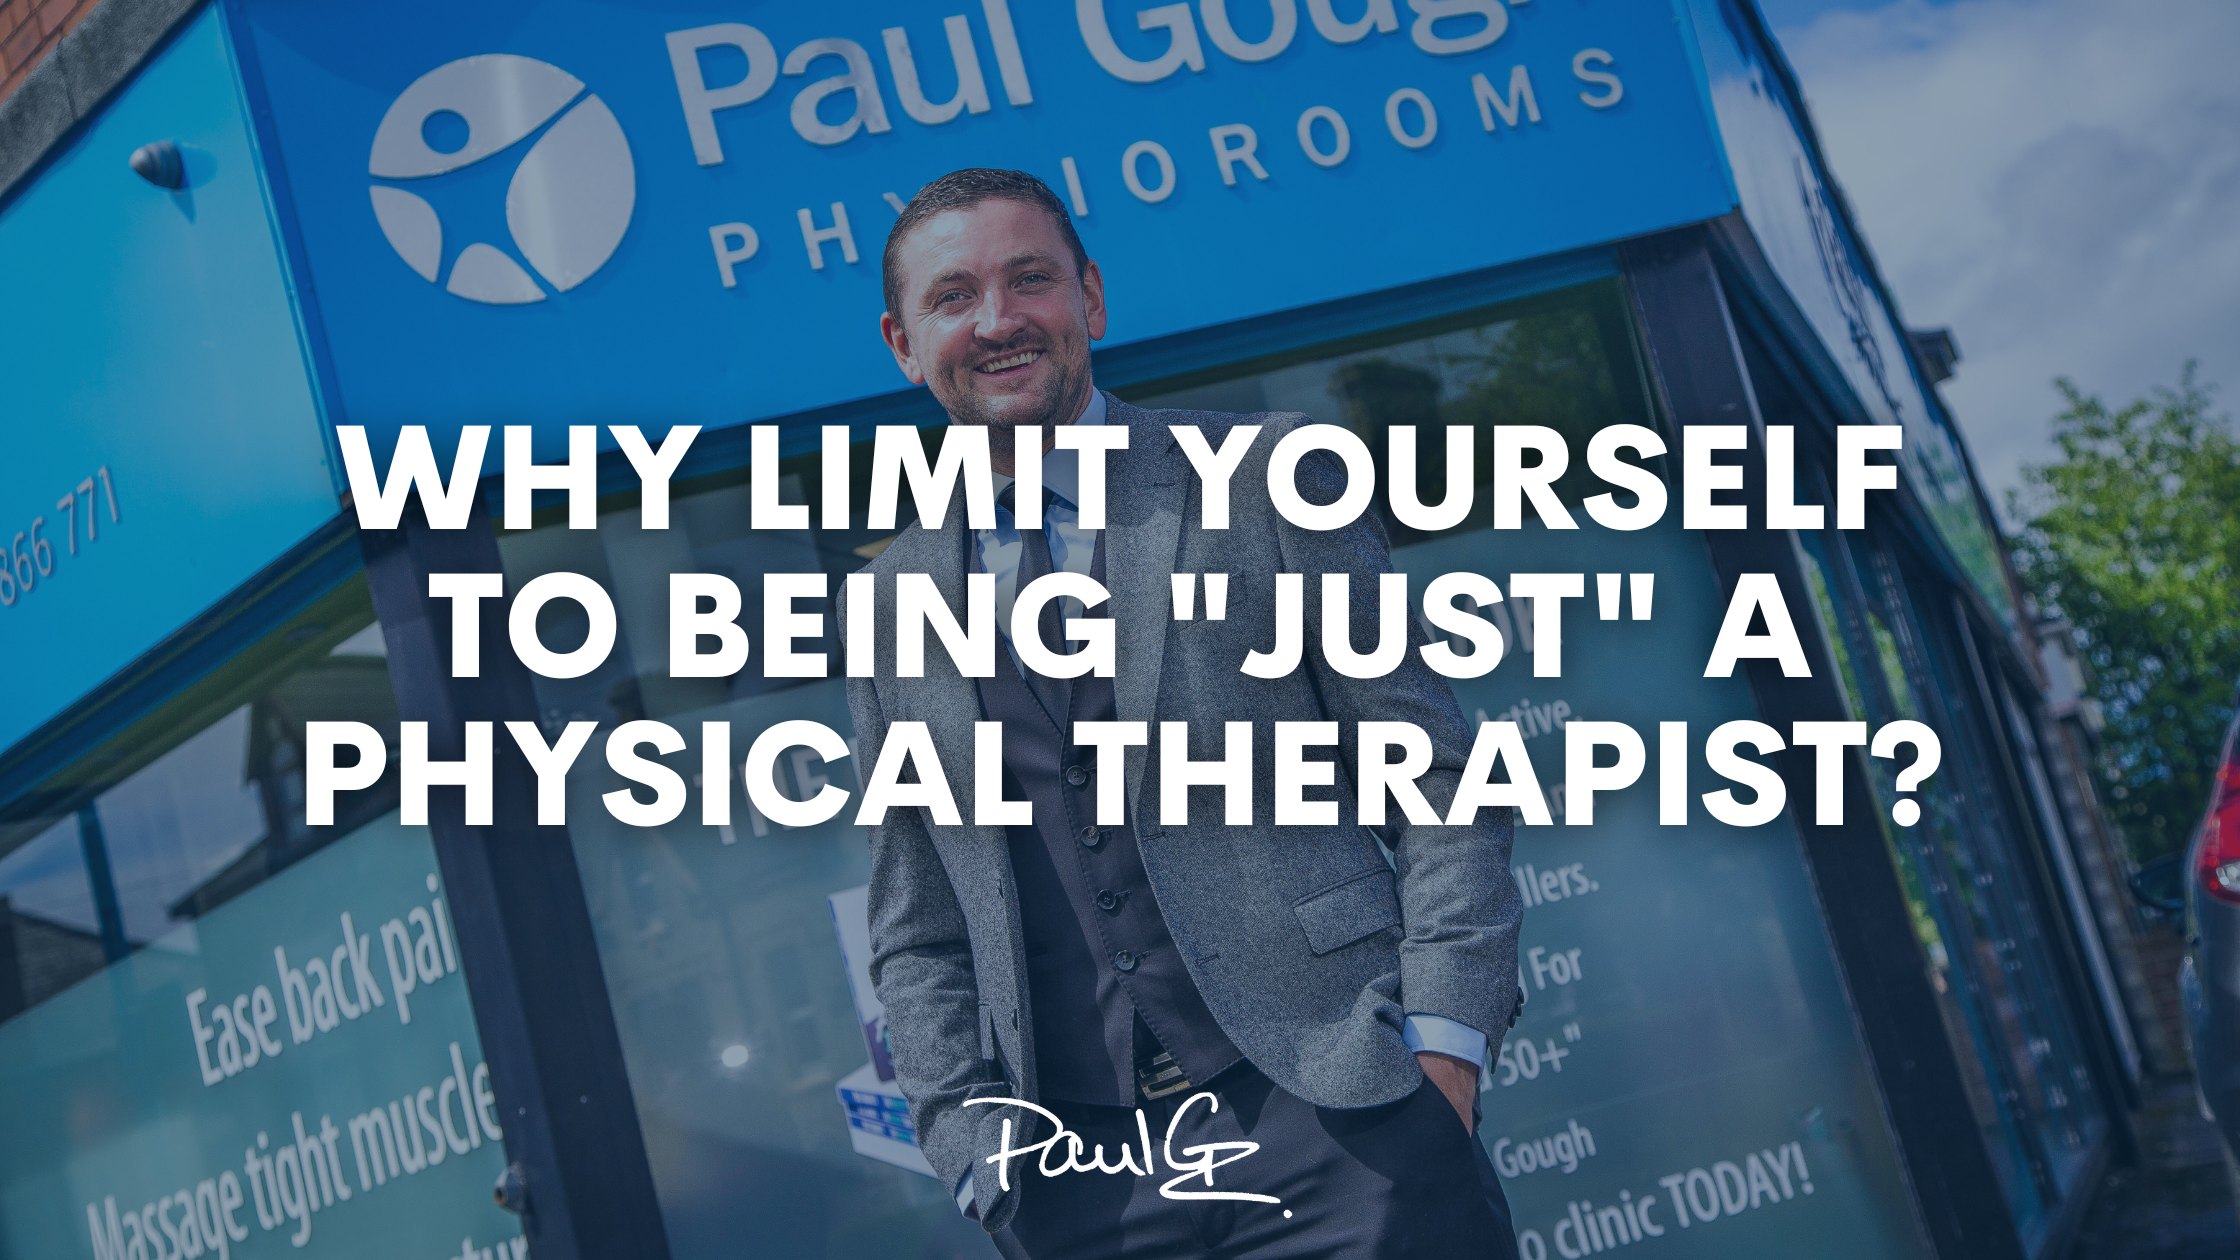 Why Limit Yourself To Being “Just” A Physical Therapist?